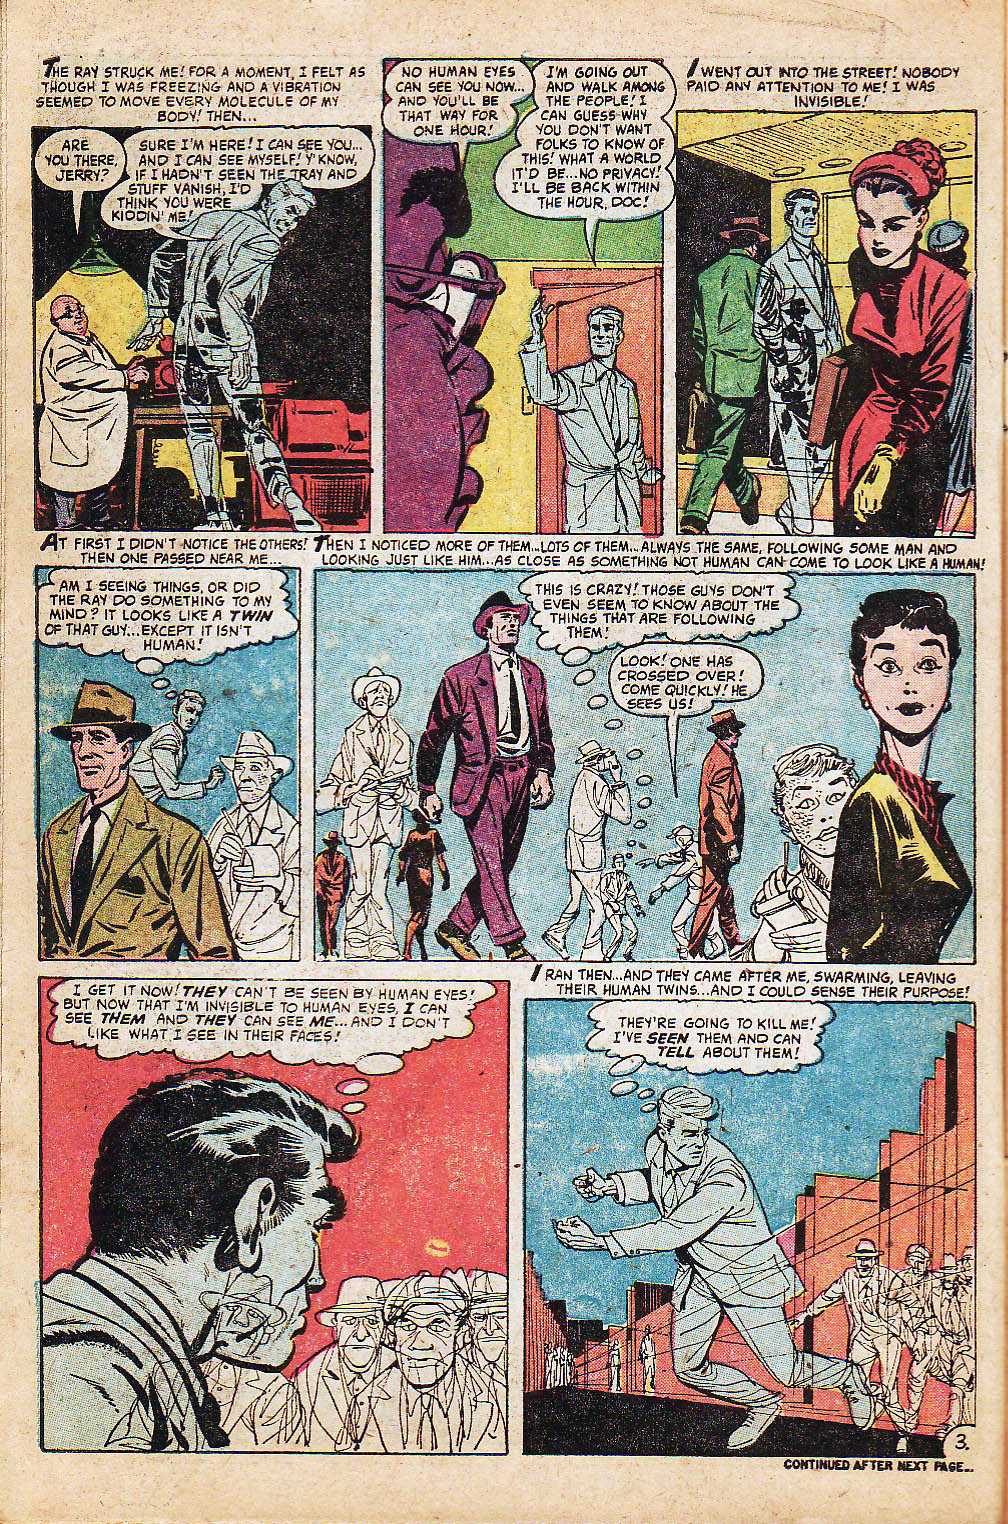 Marvel Tales (1949) 154 Page 9